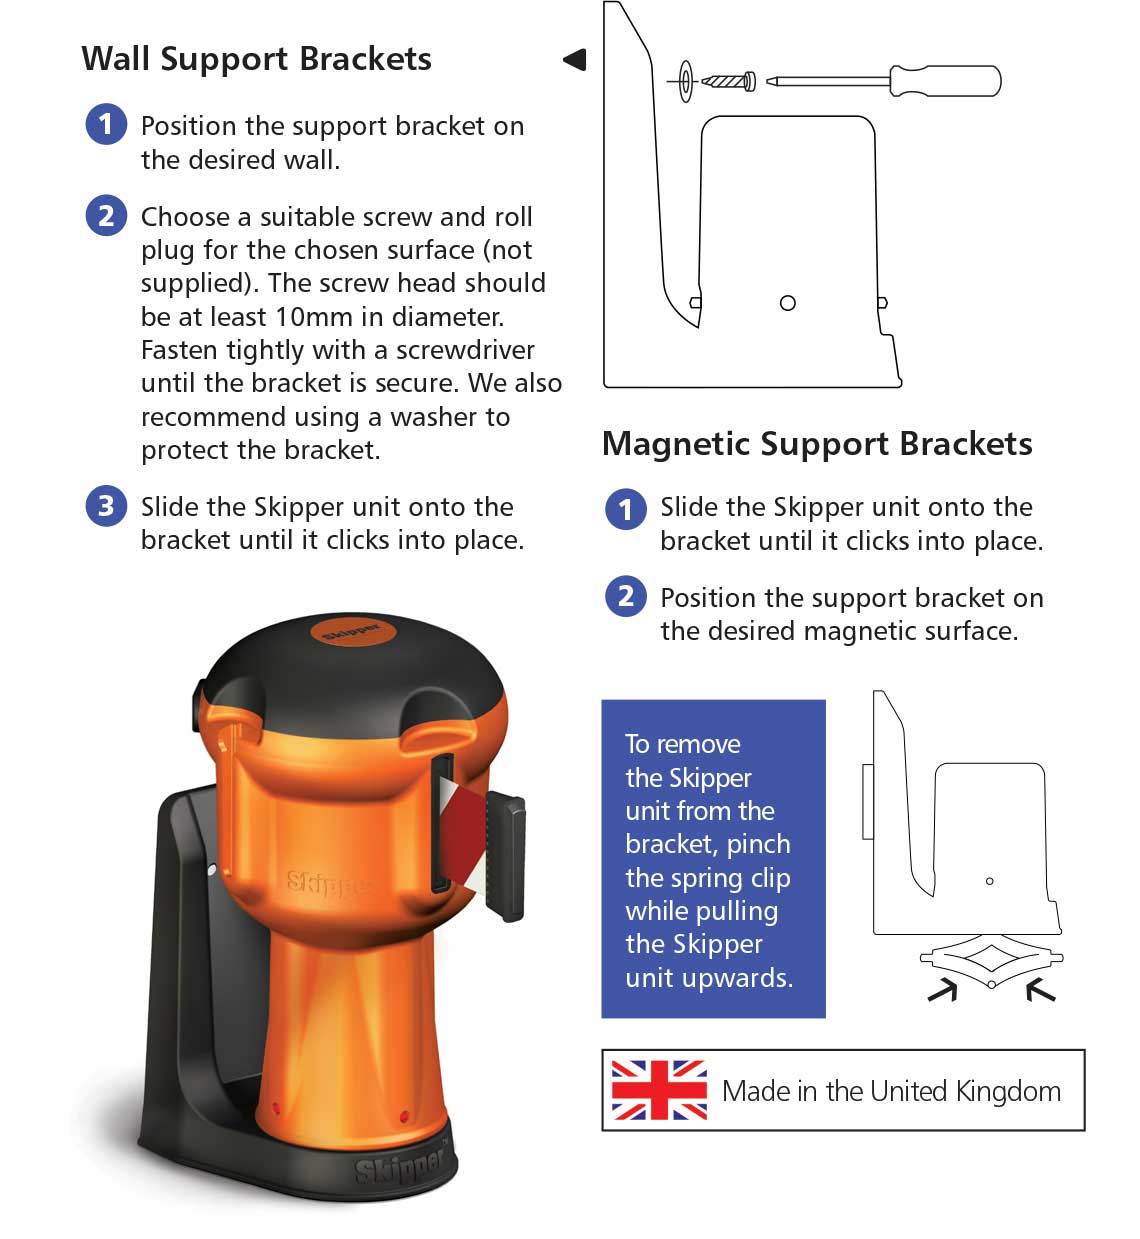 instructions on how to use the wall support bracket